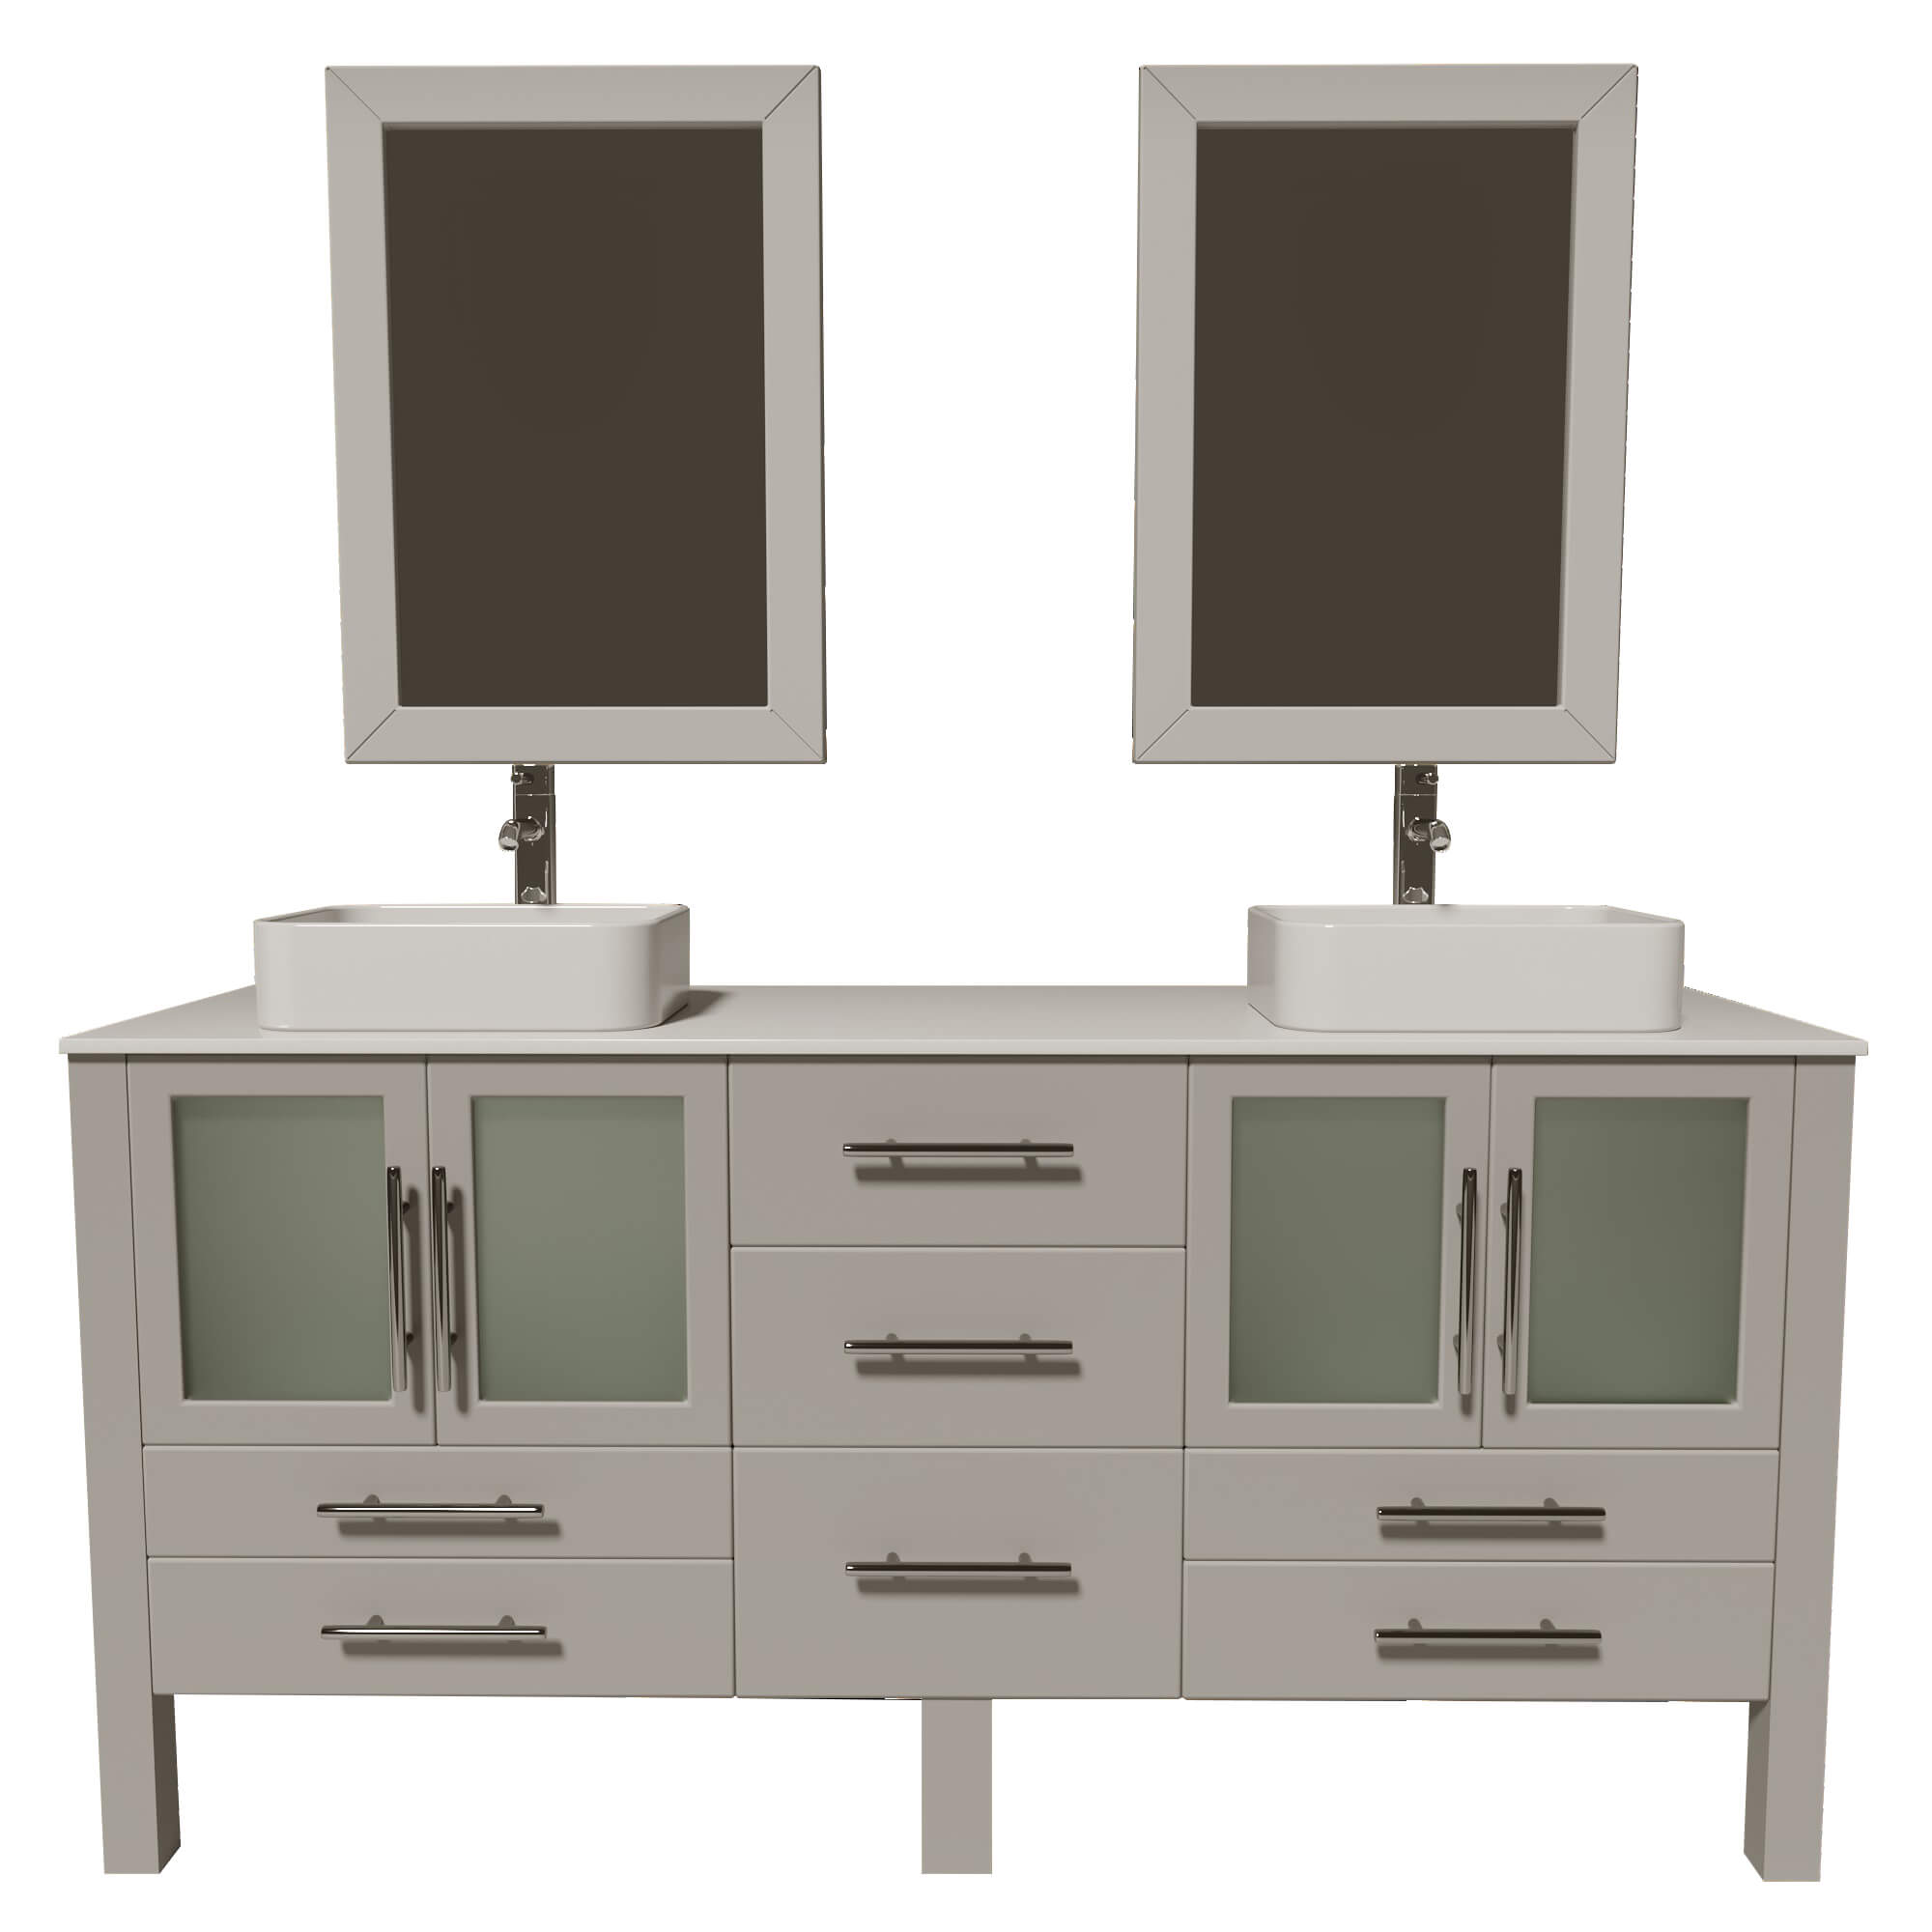 Cambridge Plumbing 8119XLG 72" Double Bathroom Vanity in Gray with White Porcelain Top and Vessel Sinks, Matching Mirrors, Front View with Chrome Faucets